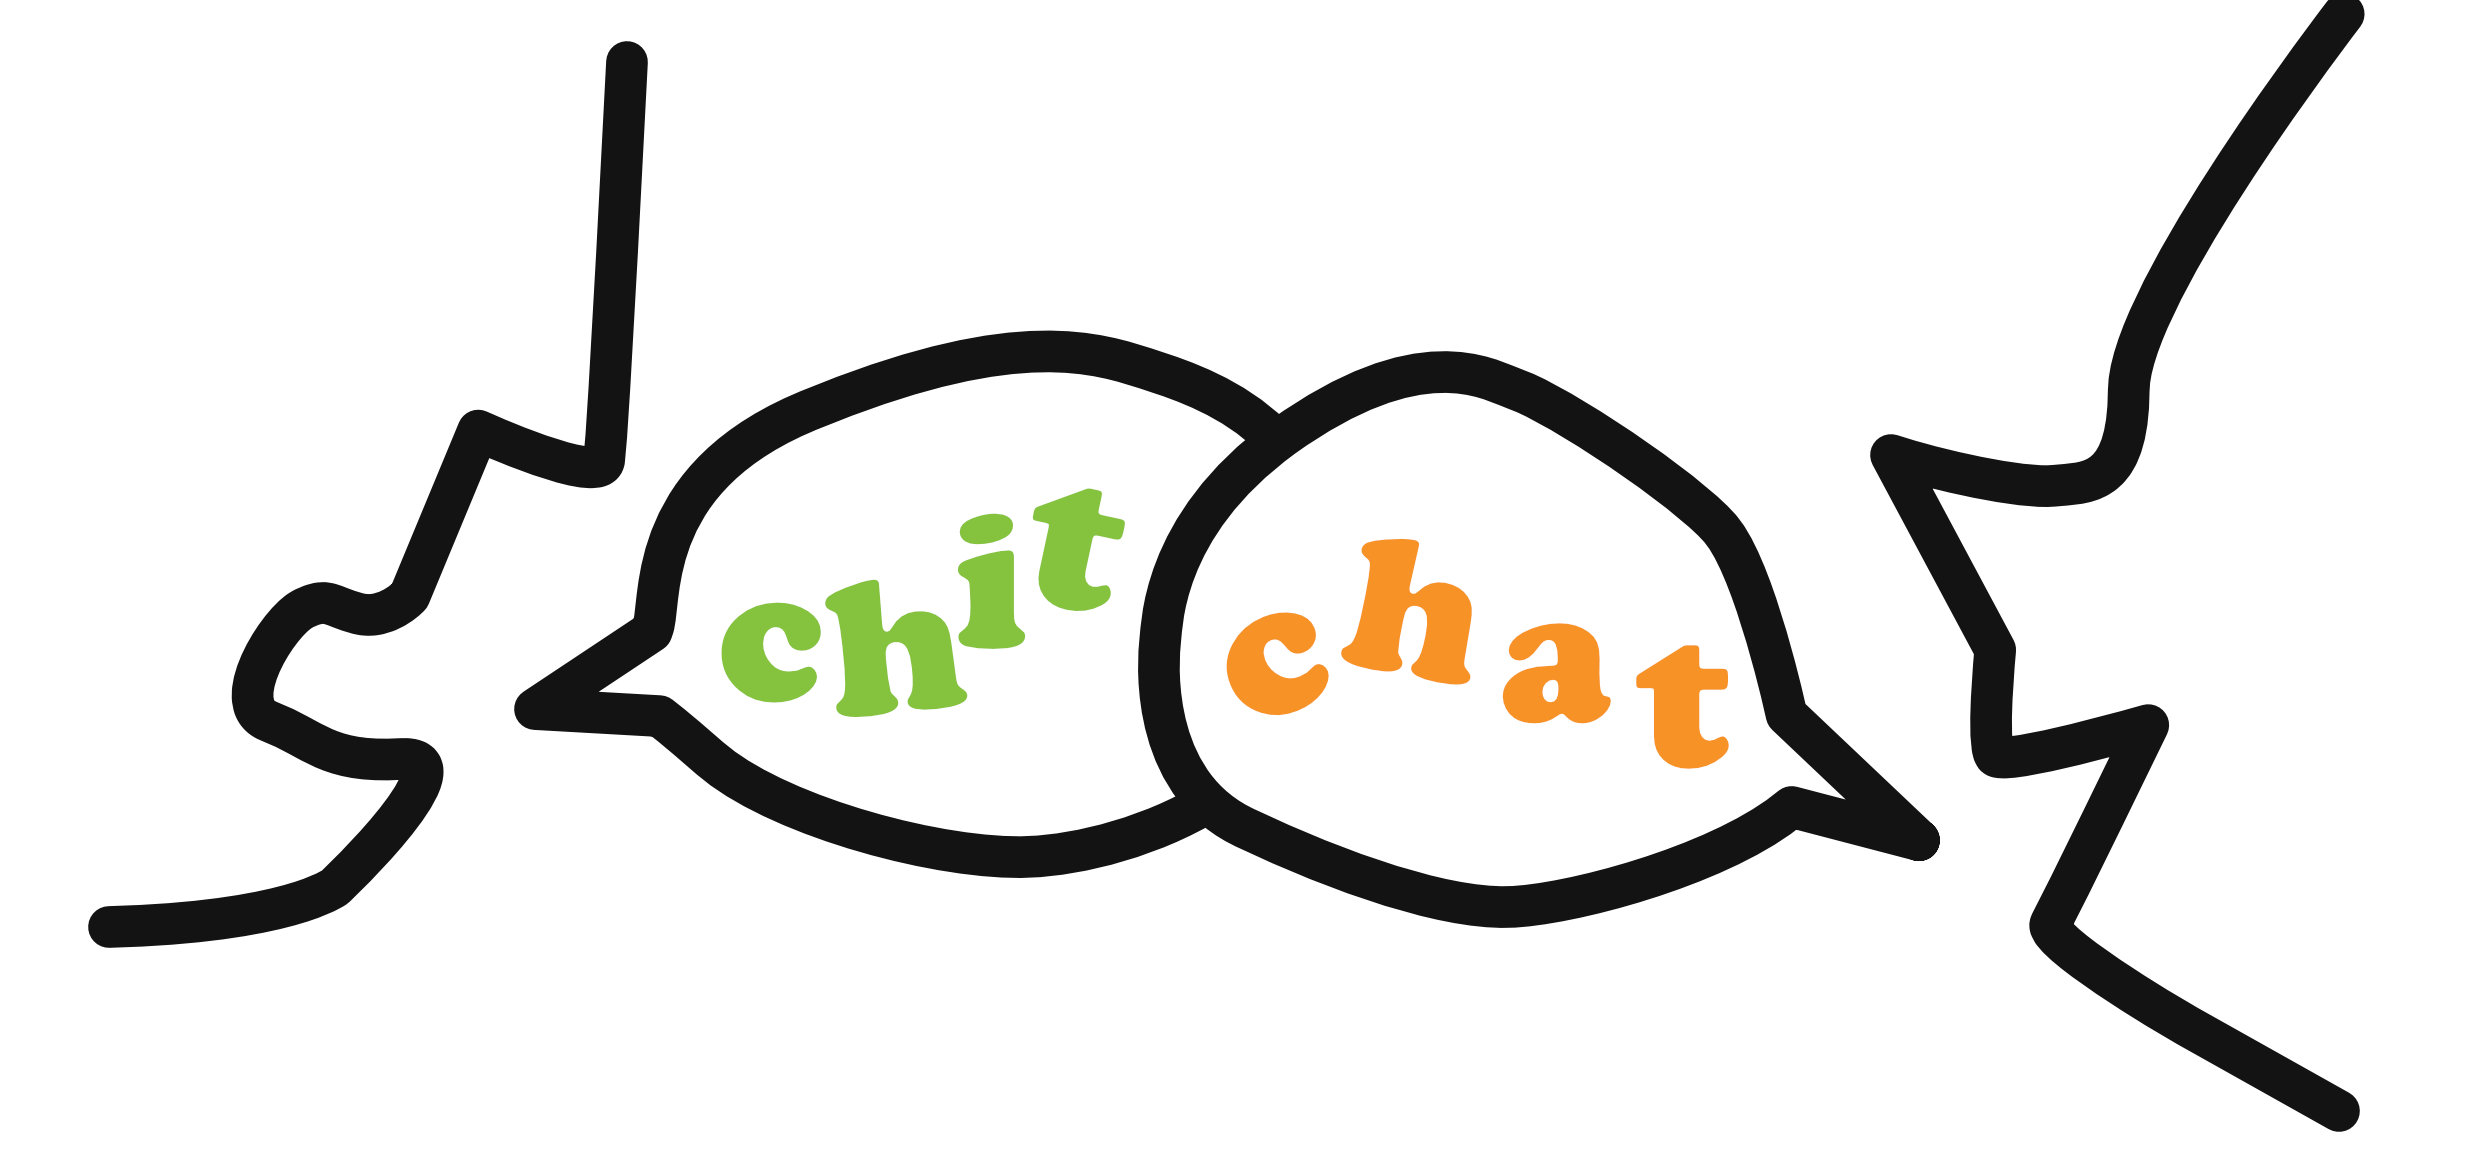 chit chat - a talking board game